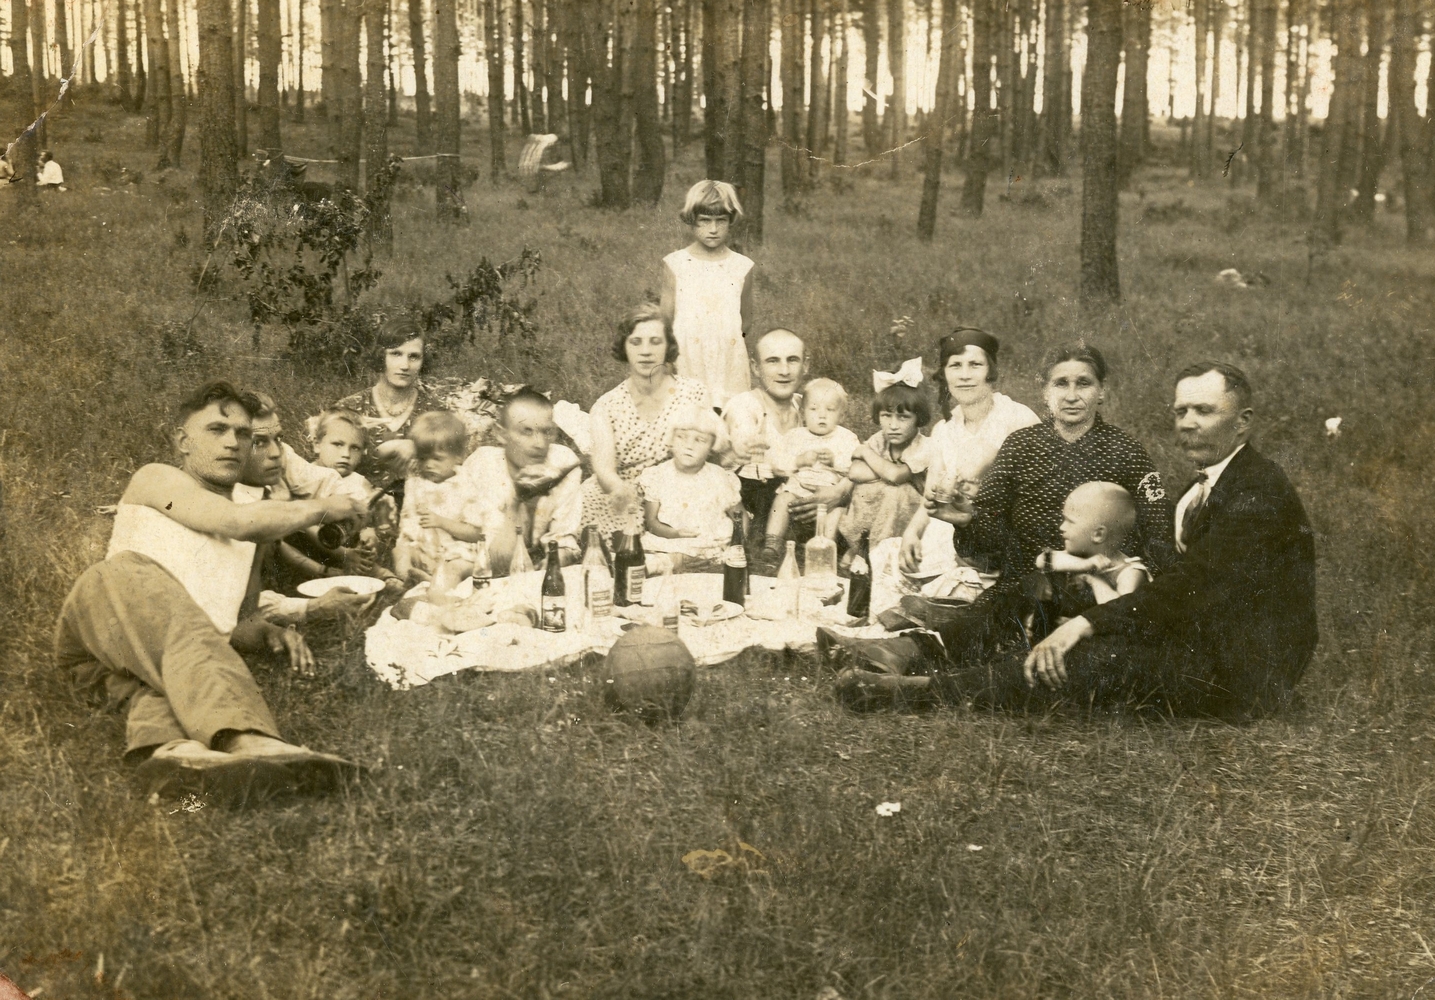 A sepia 
photograph of 15 people of three generations sitting around a tablecloth in a forest clearing.